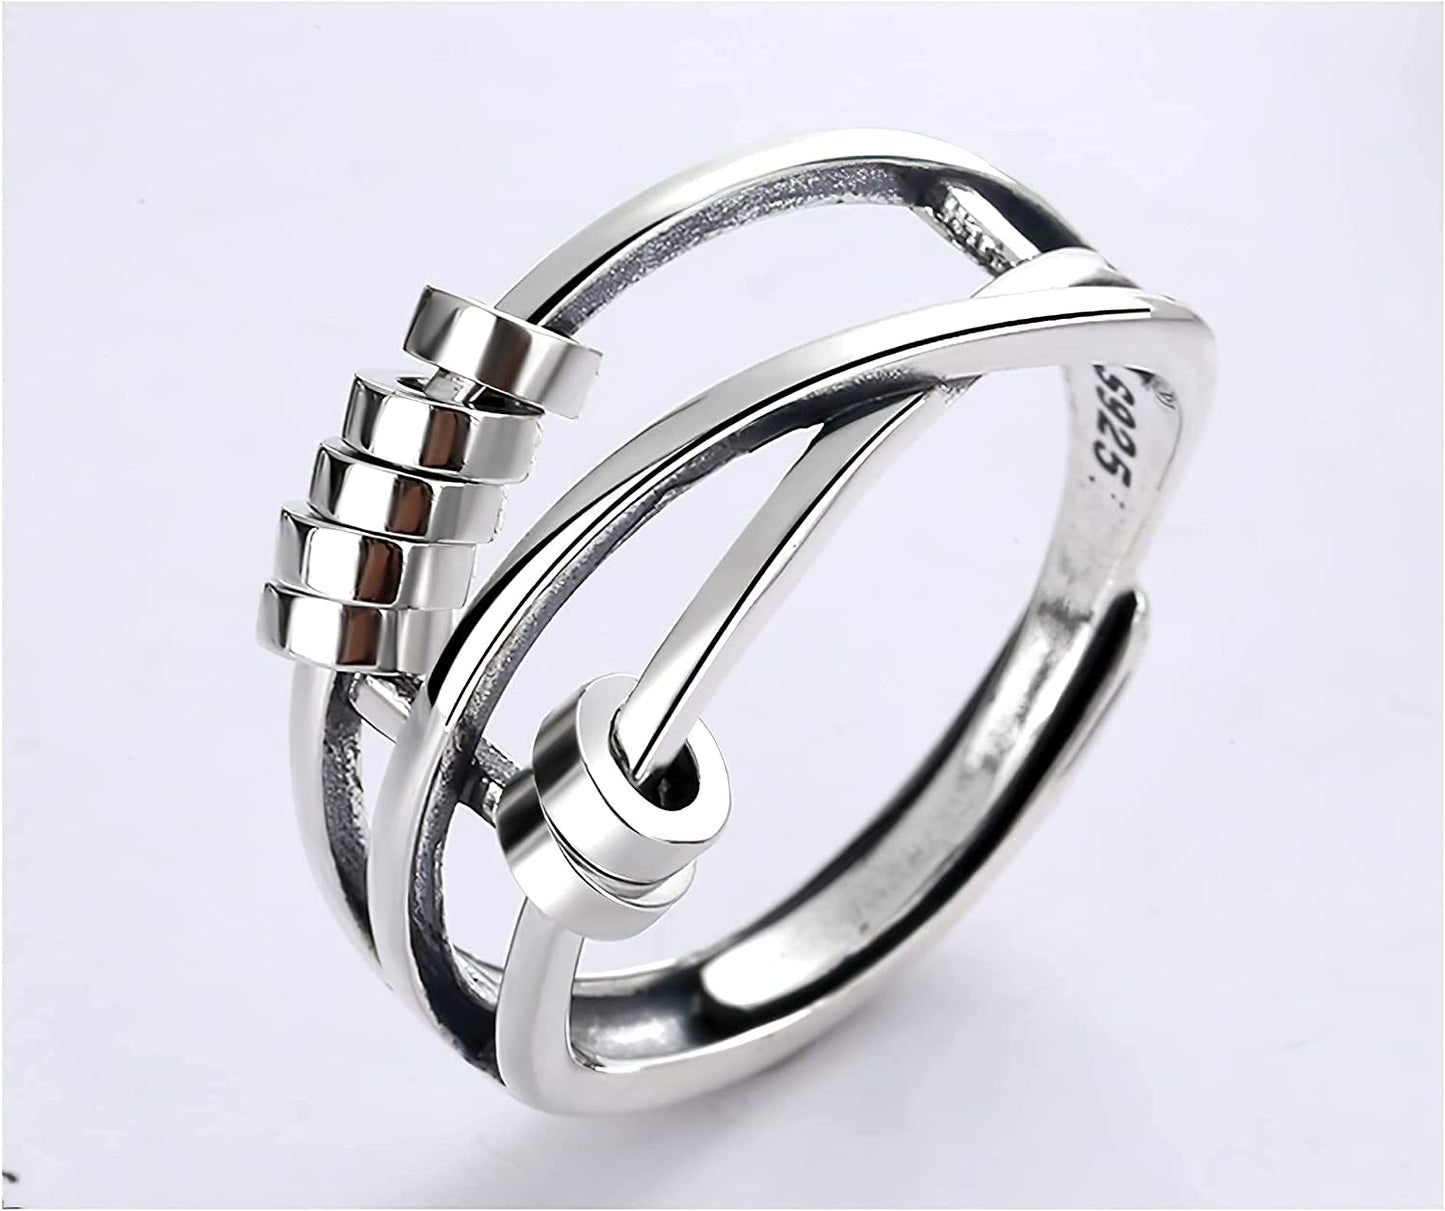 Silver Anti Anxiety Rings For Women Men Fidget Spinner Band Unisex Adjustable Stacking Spinning Worry Ring